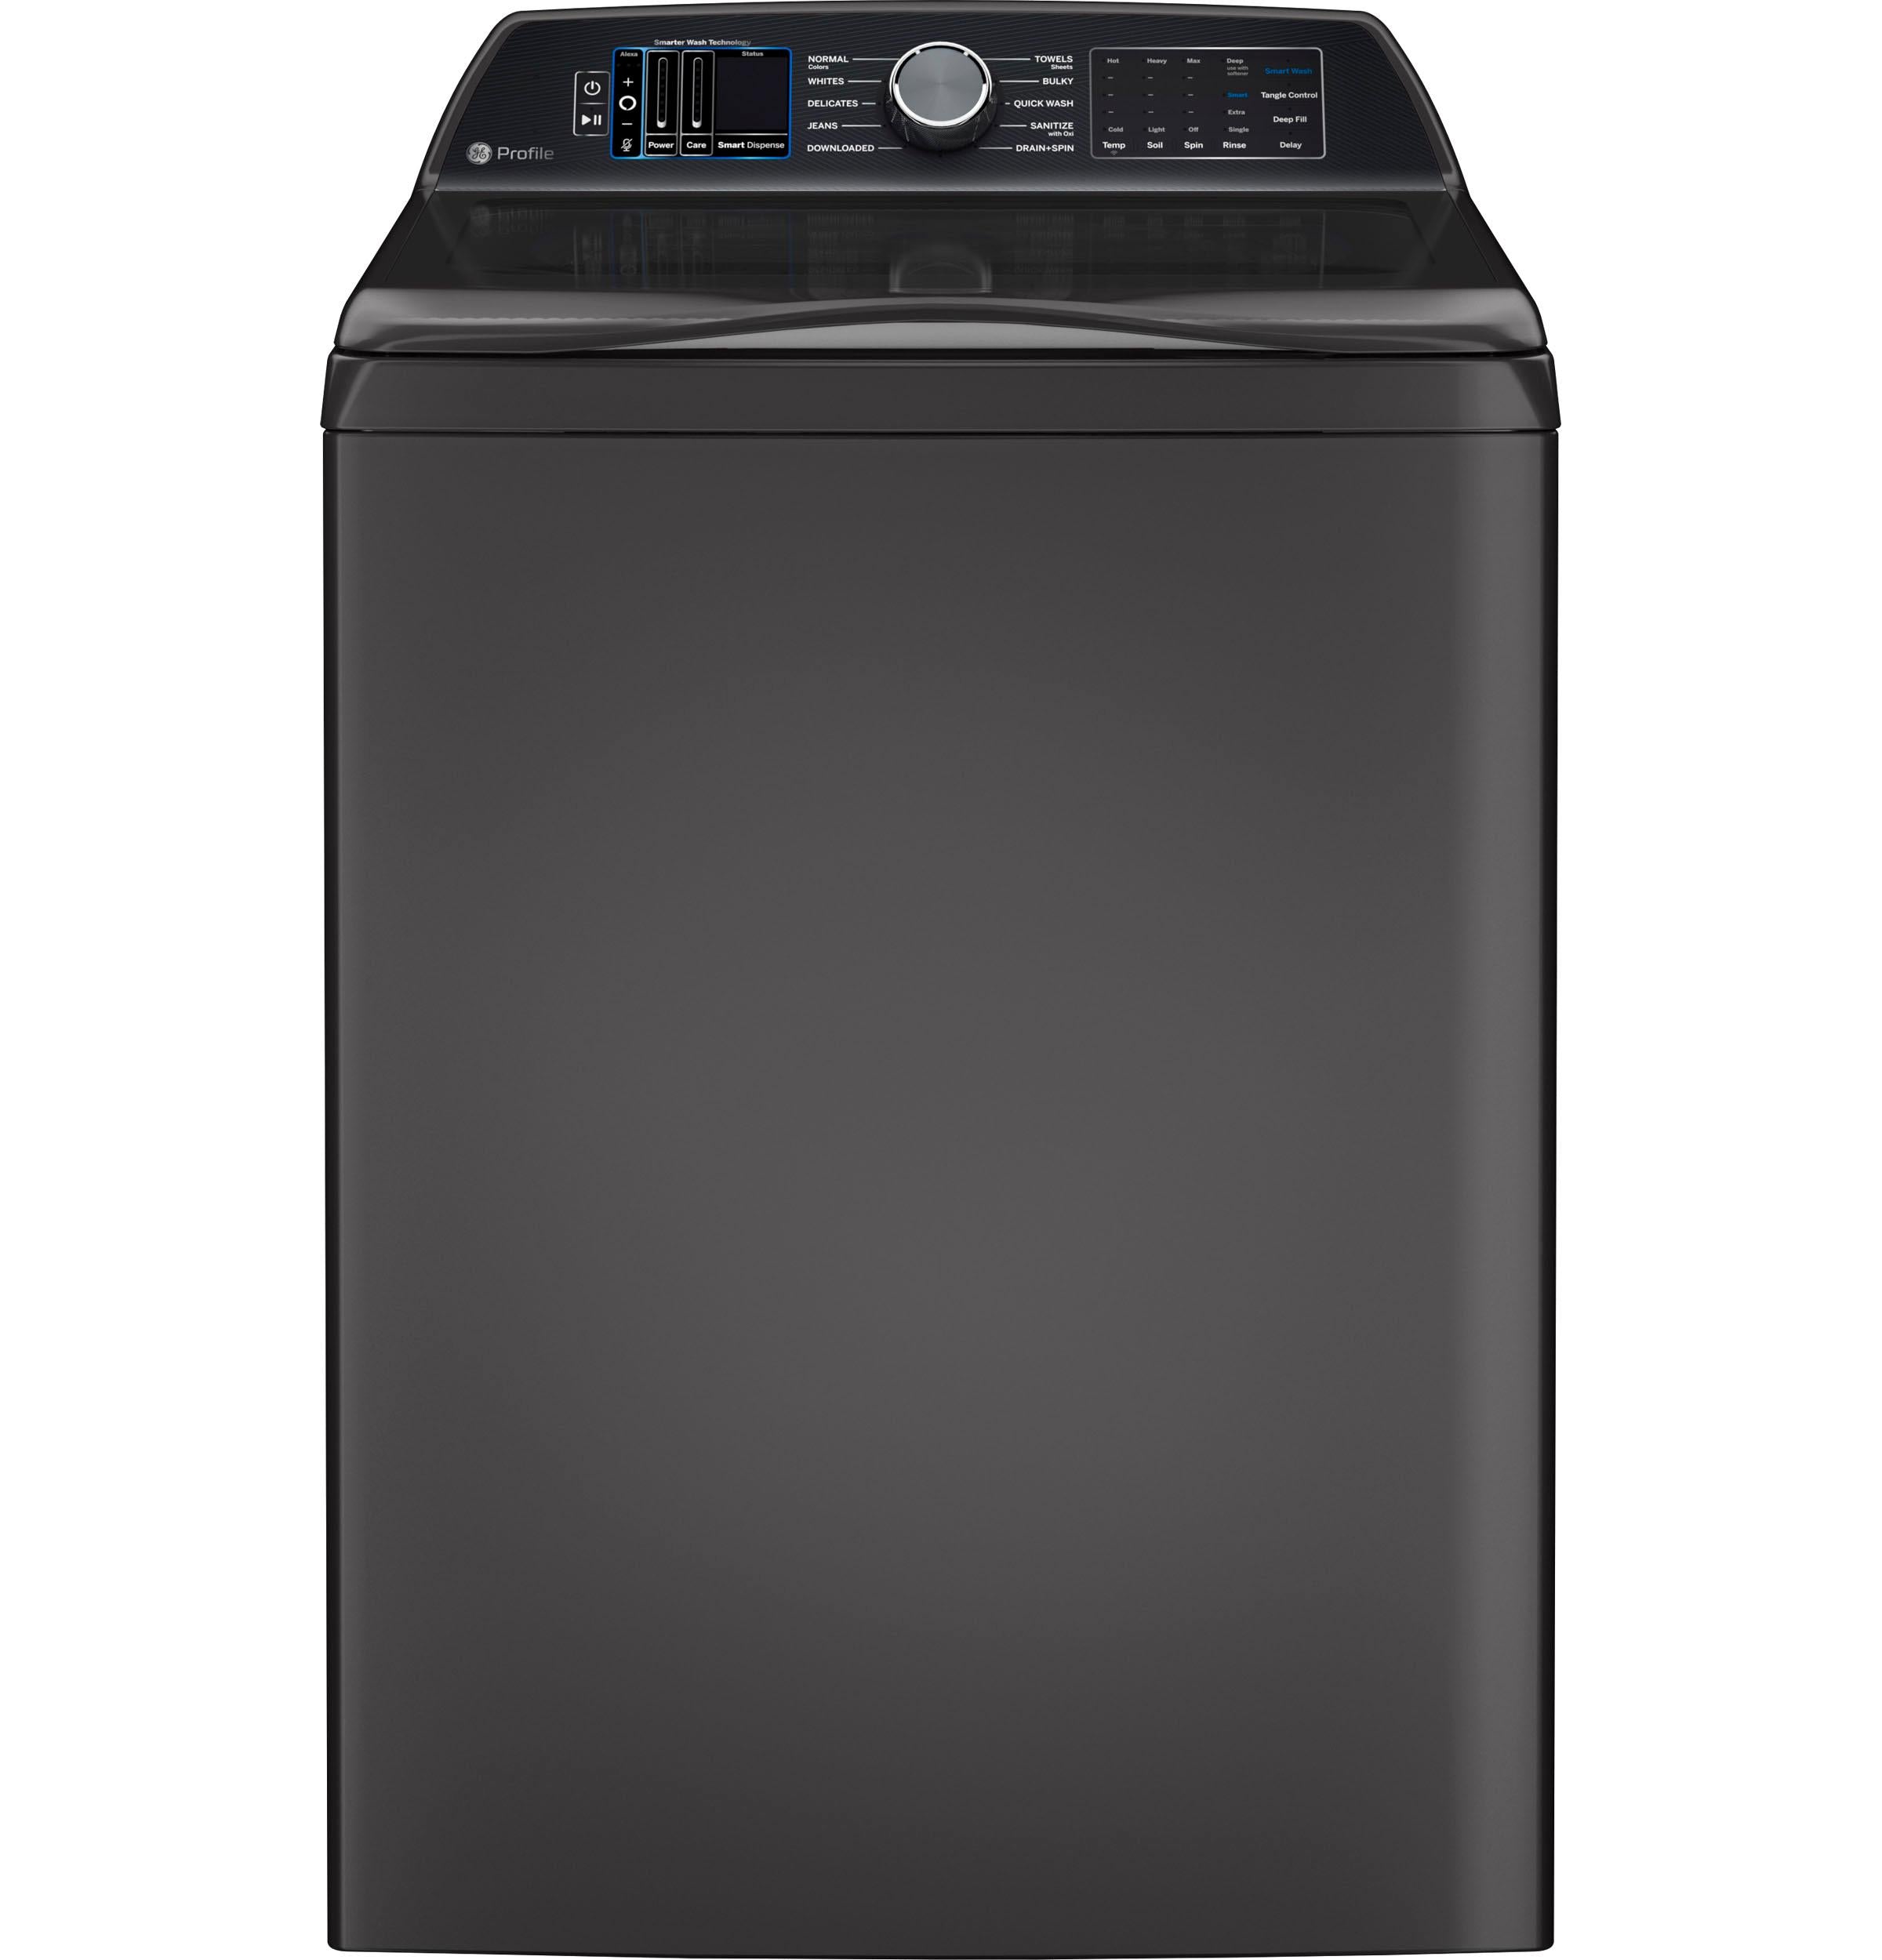 GE Profile™ 5.3 cu. ft. Capacity Washer with Smarter Wash Technology and FlexDispense™